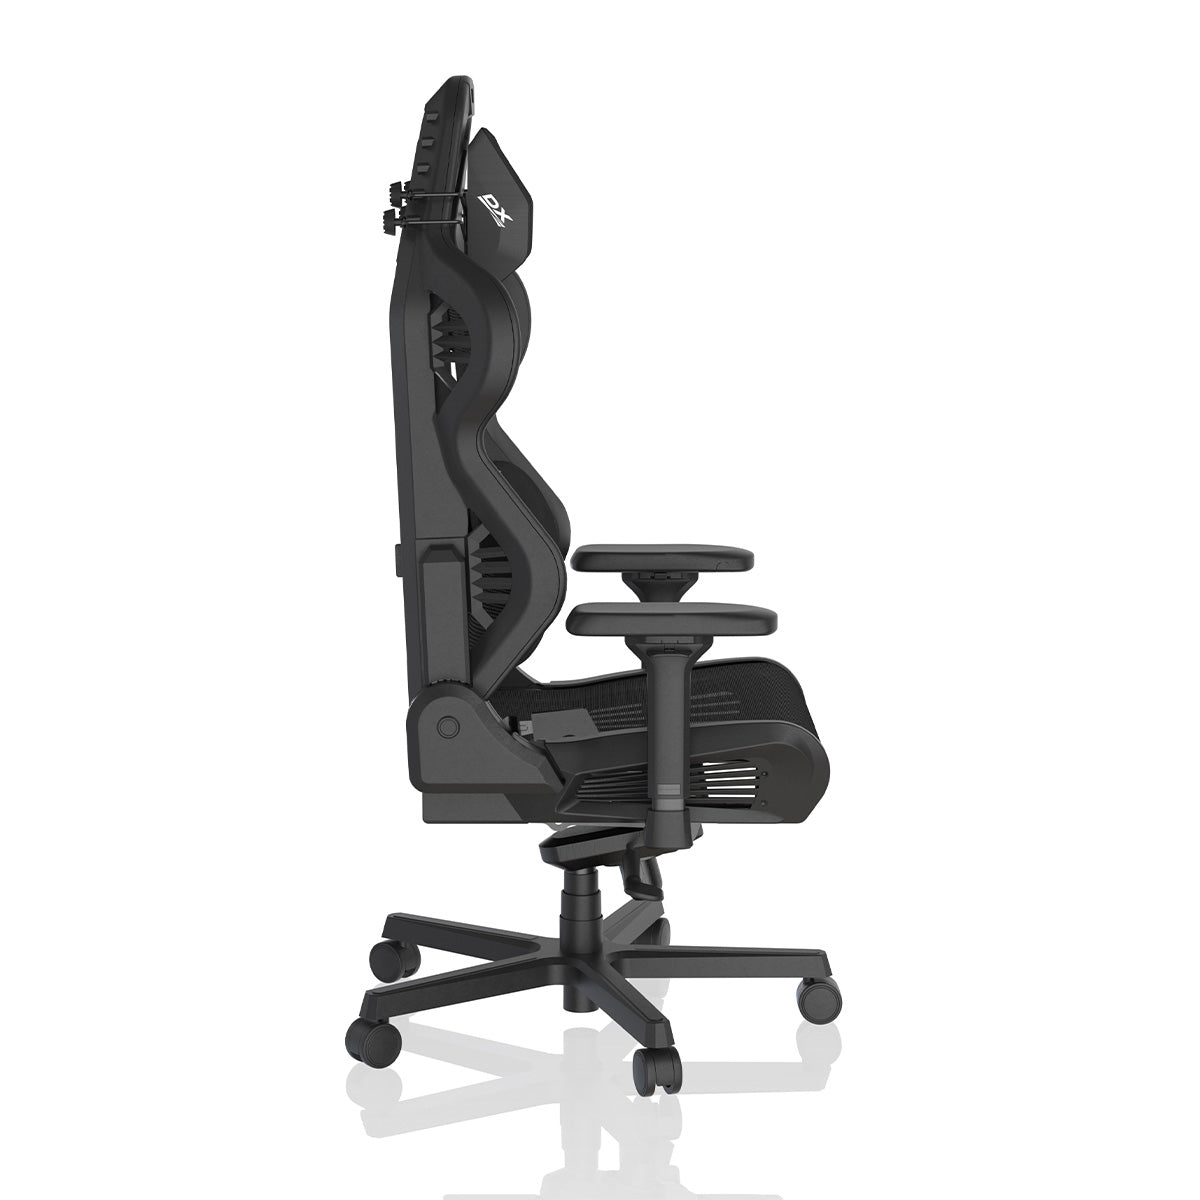 DXRacer AIR PRO Series Gaming Chair - Solo Gamer Bolivia